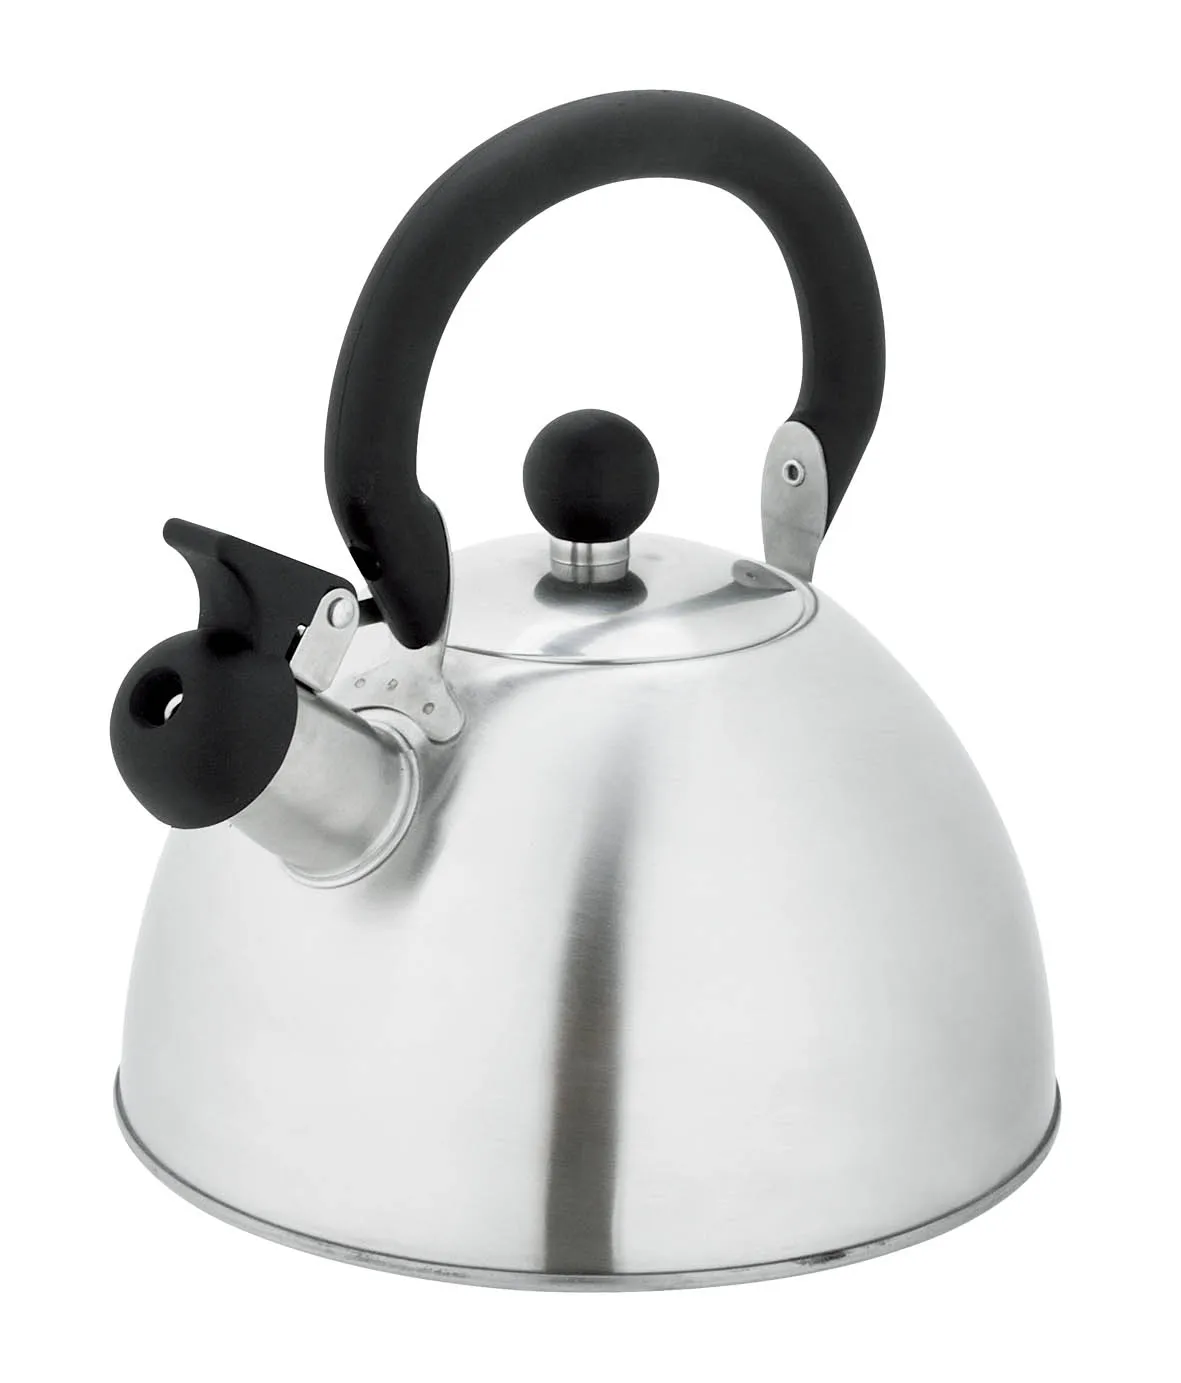 

Kitchen Utensils Stove Whistling Kettle Luxurious High Quality Stainless Steel Water Kettles For Induction Cooker